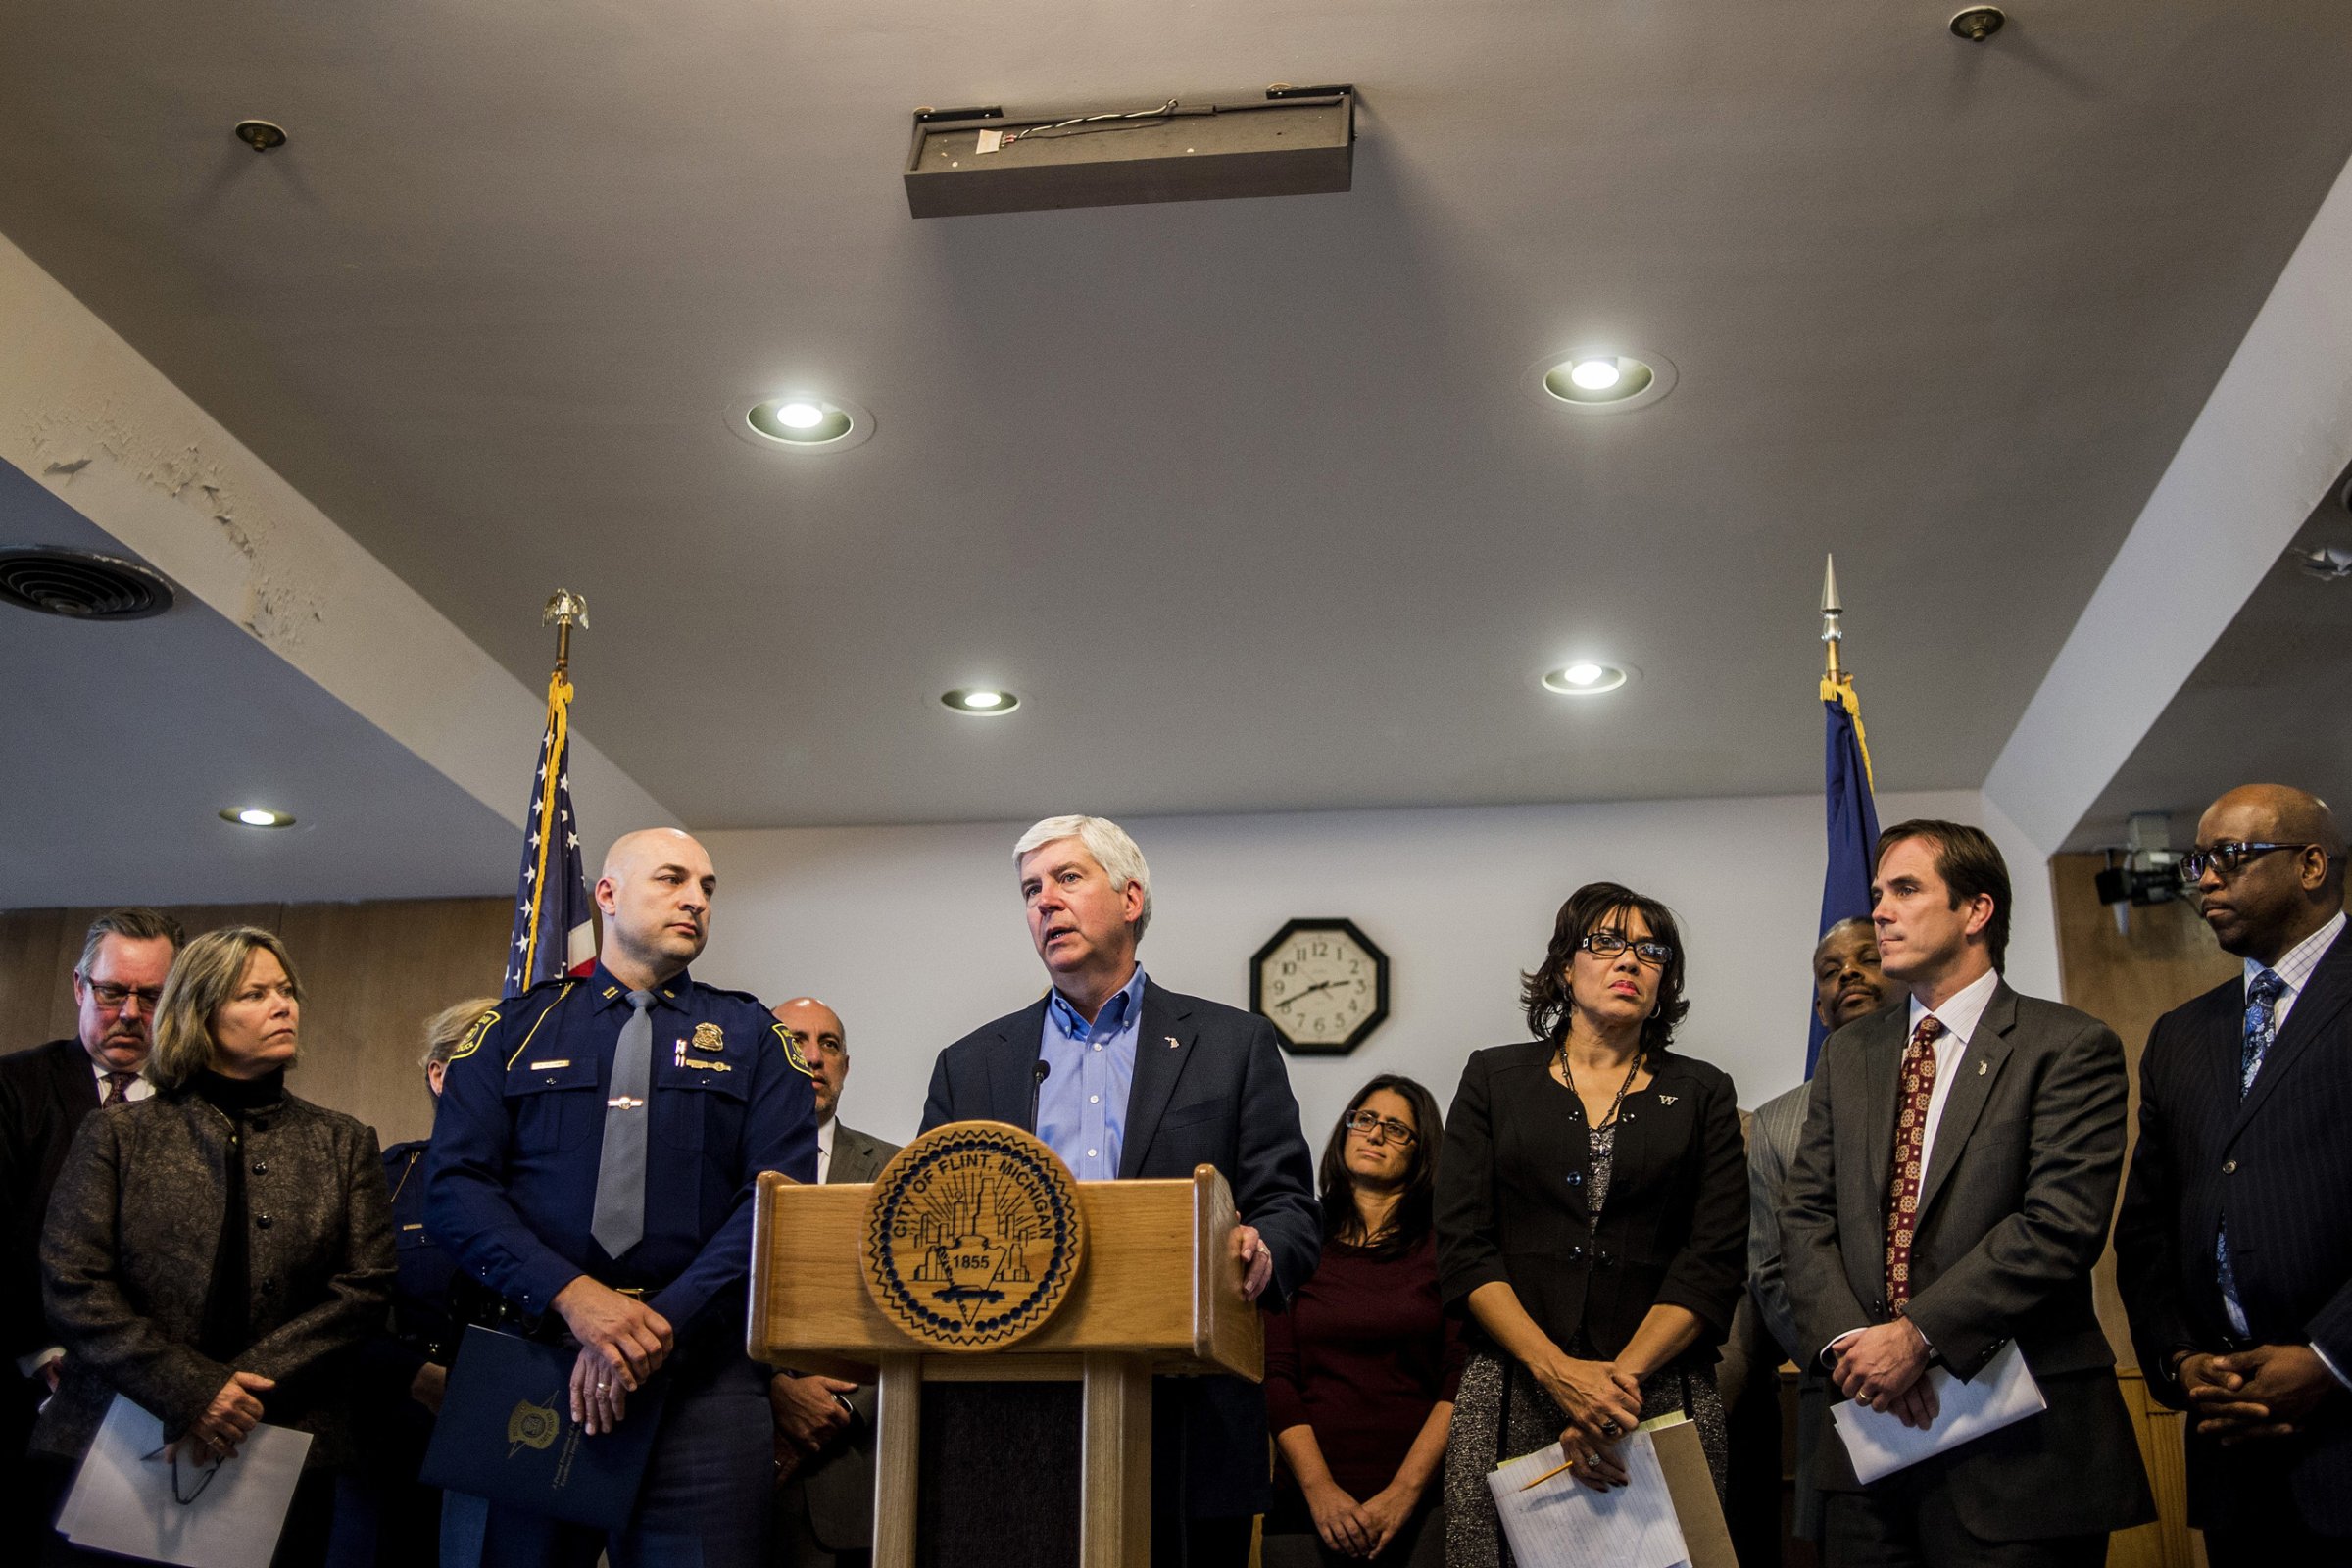 Michigan Gov. Rick Snyder speaks during a news conference in Flint, Mich., Monday, Jan. 11, 2016. Snyder pledged Monday that officials would make contact with every household in Flint to check whether residents have bottled water and a filter and want to be tested for lead exposure while his embattled administration works on a long-term solution to the city's water crisis. (Jake May/The Flint Journal-MLive.com via AP) LOCAL TELEVISION OUT; LOCAL INTERNET OUT; MANDATORY CREDIT